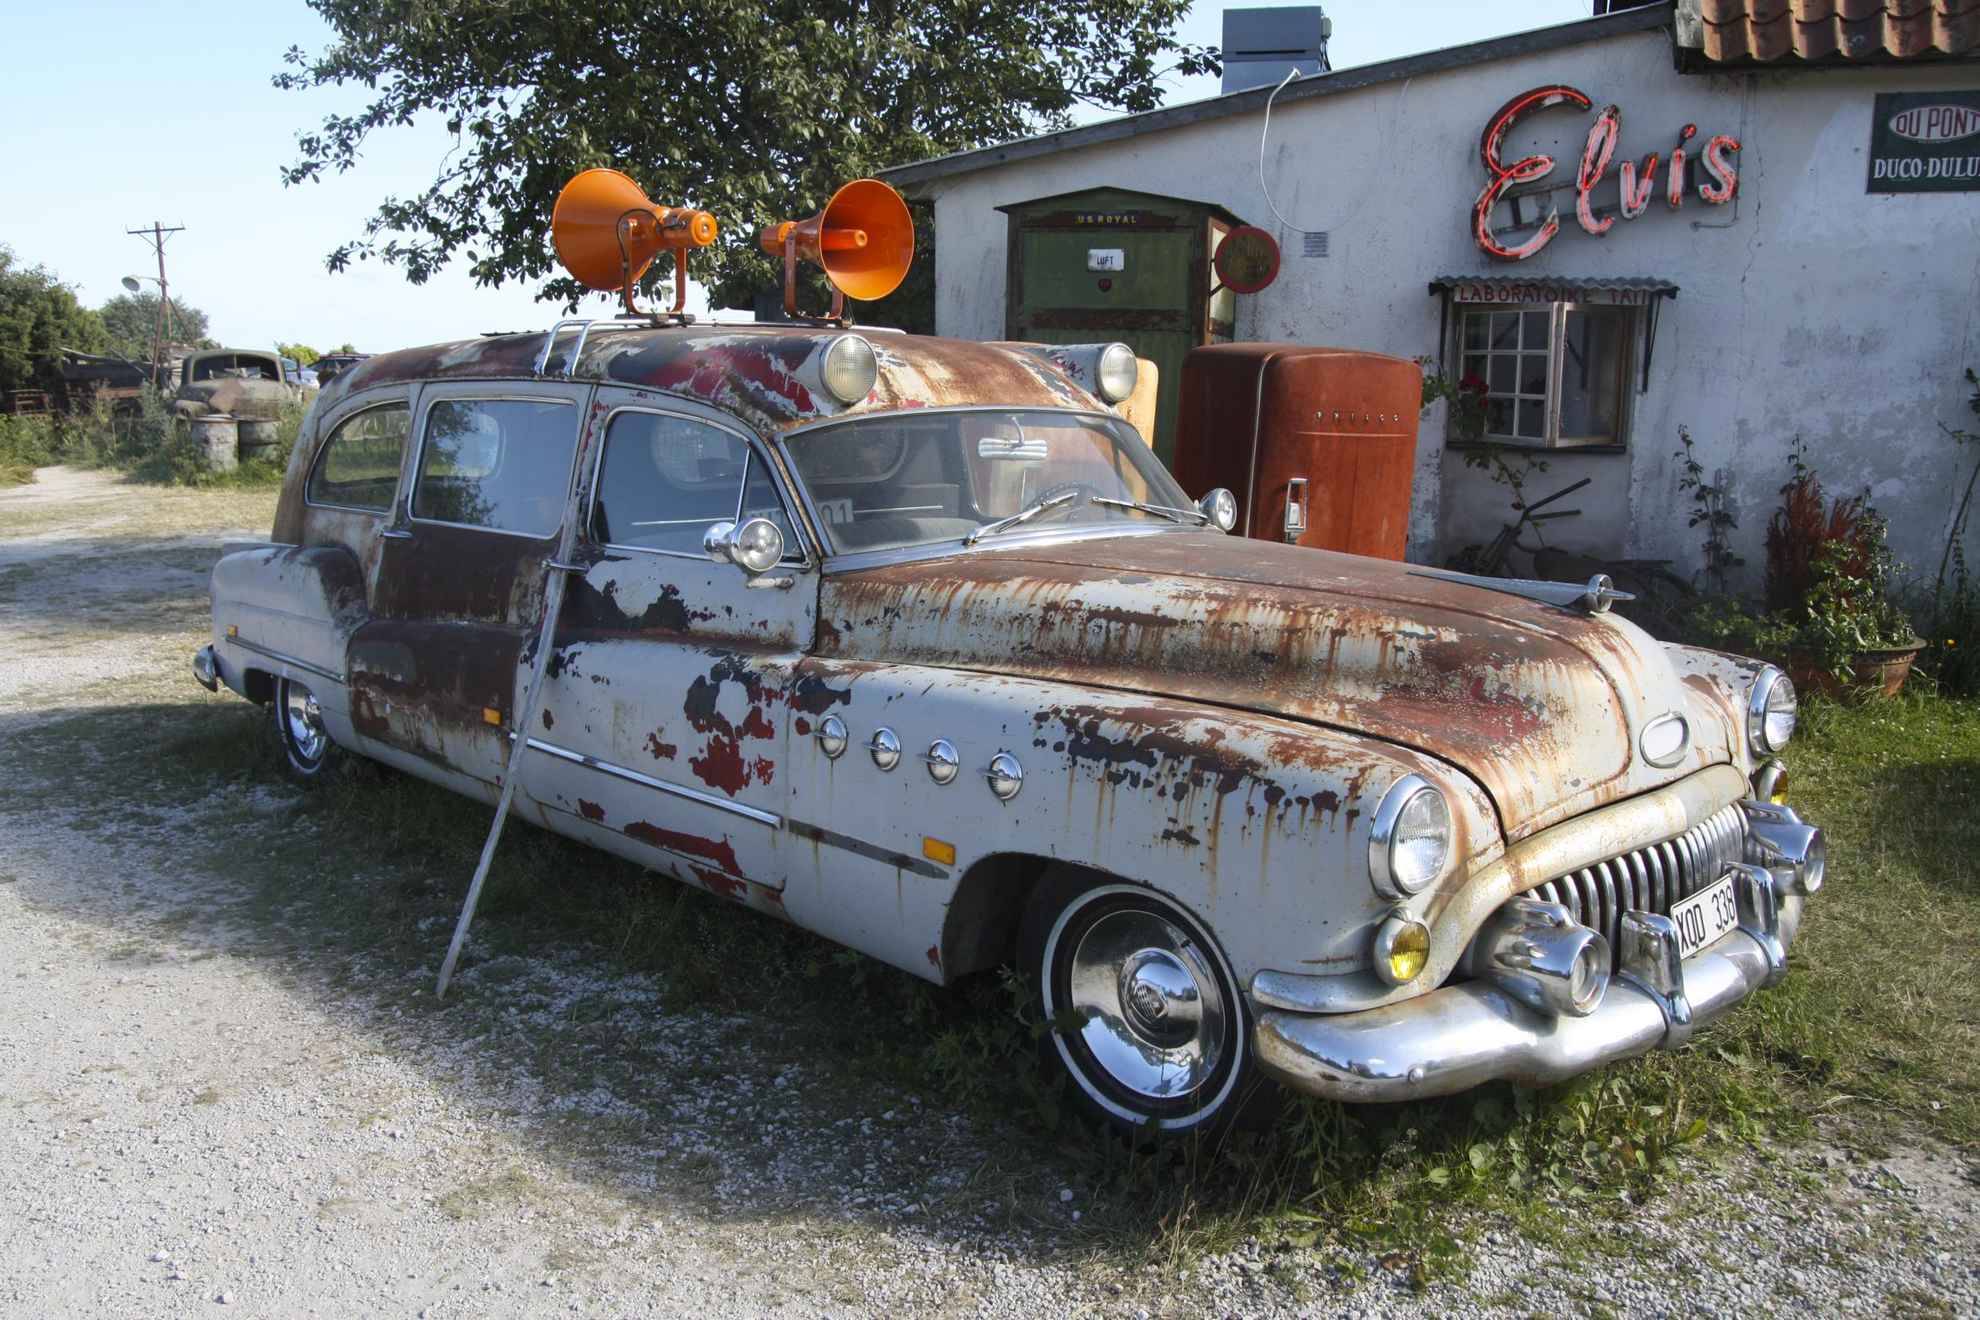 An old rusty car with sirens on the roof in front of an old gasoline station.